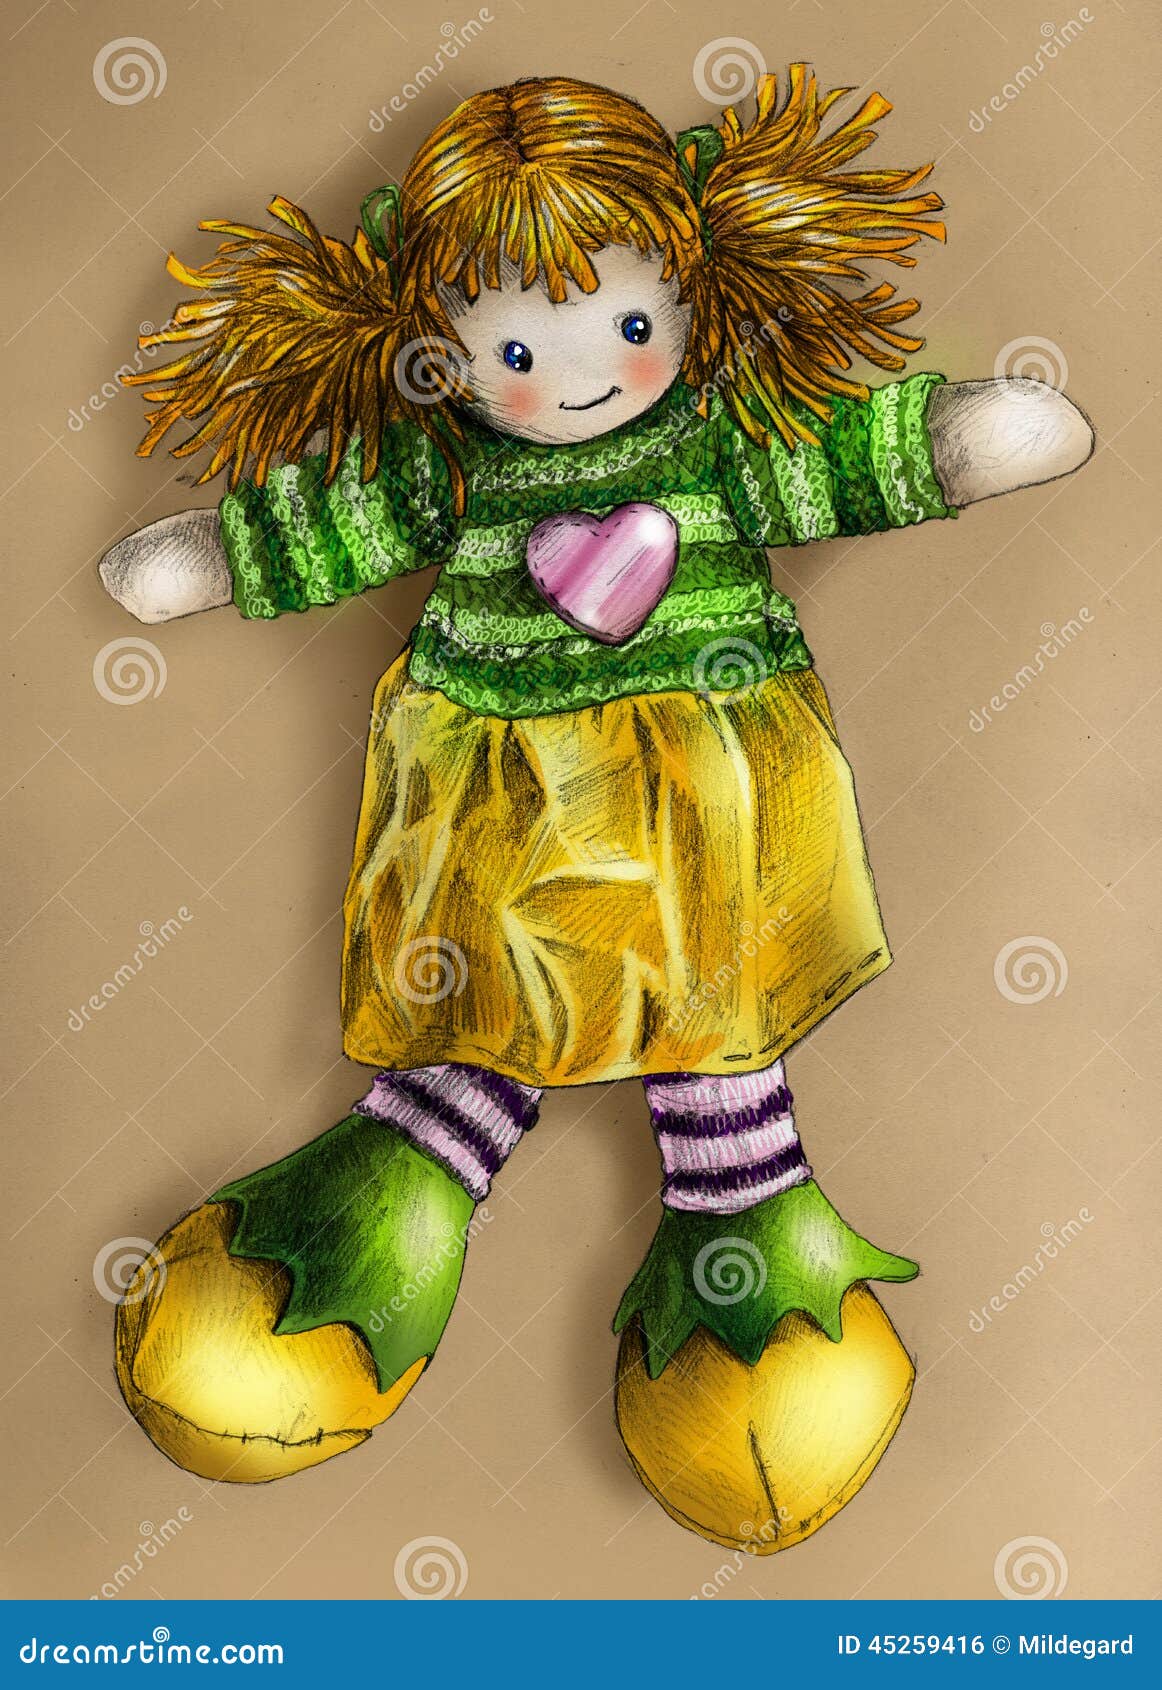 Doll Drawing: Over 53,818 Royalty-Free Licensable Stock Illustrations &  Drawings | Shutterstock